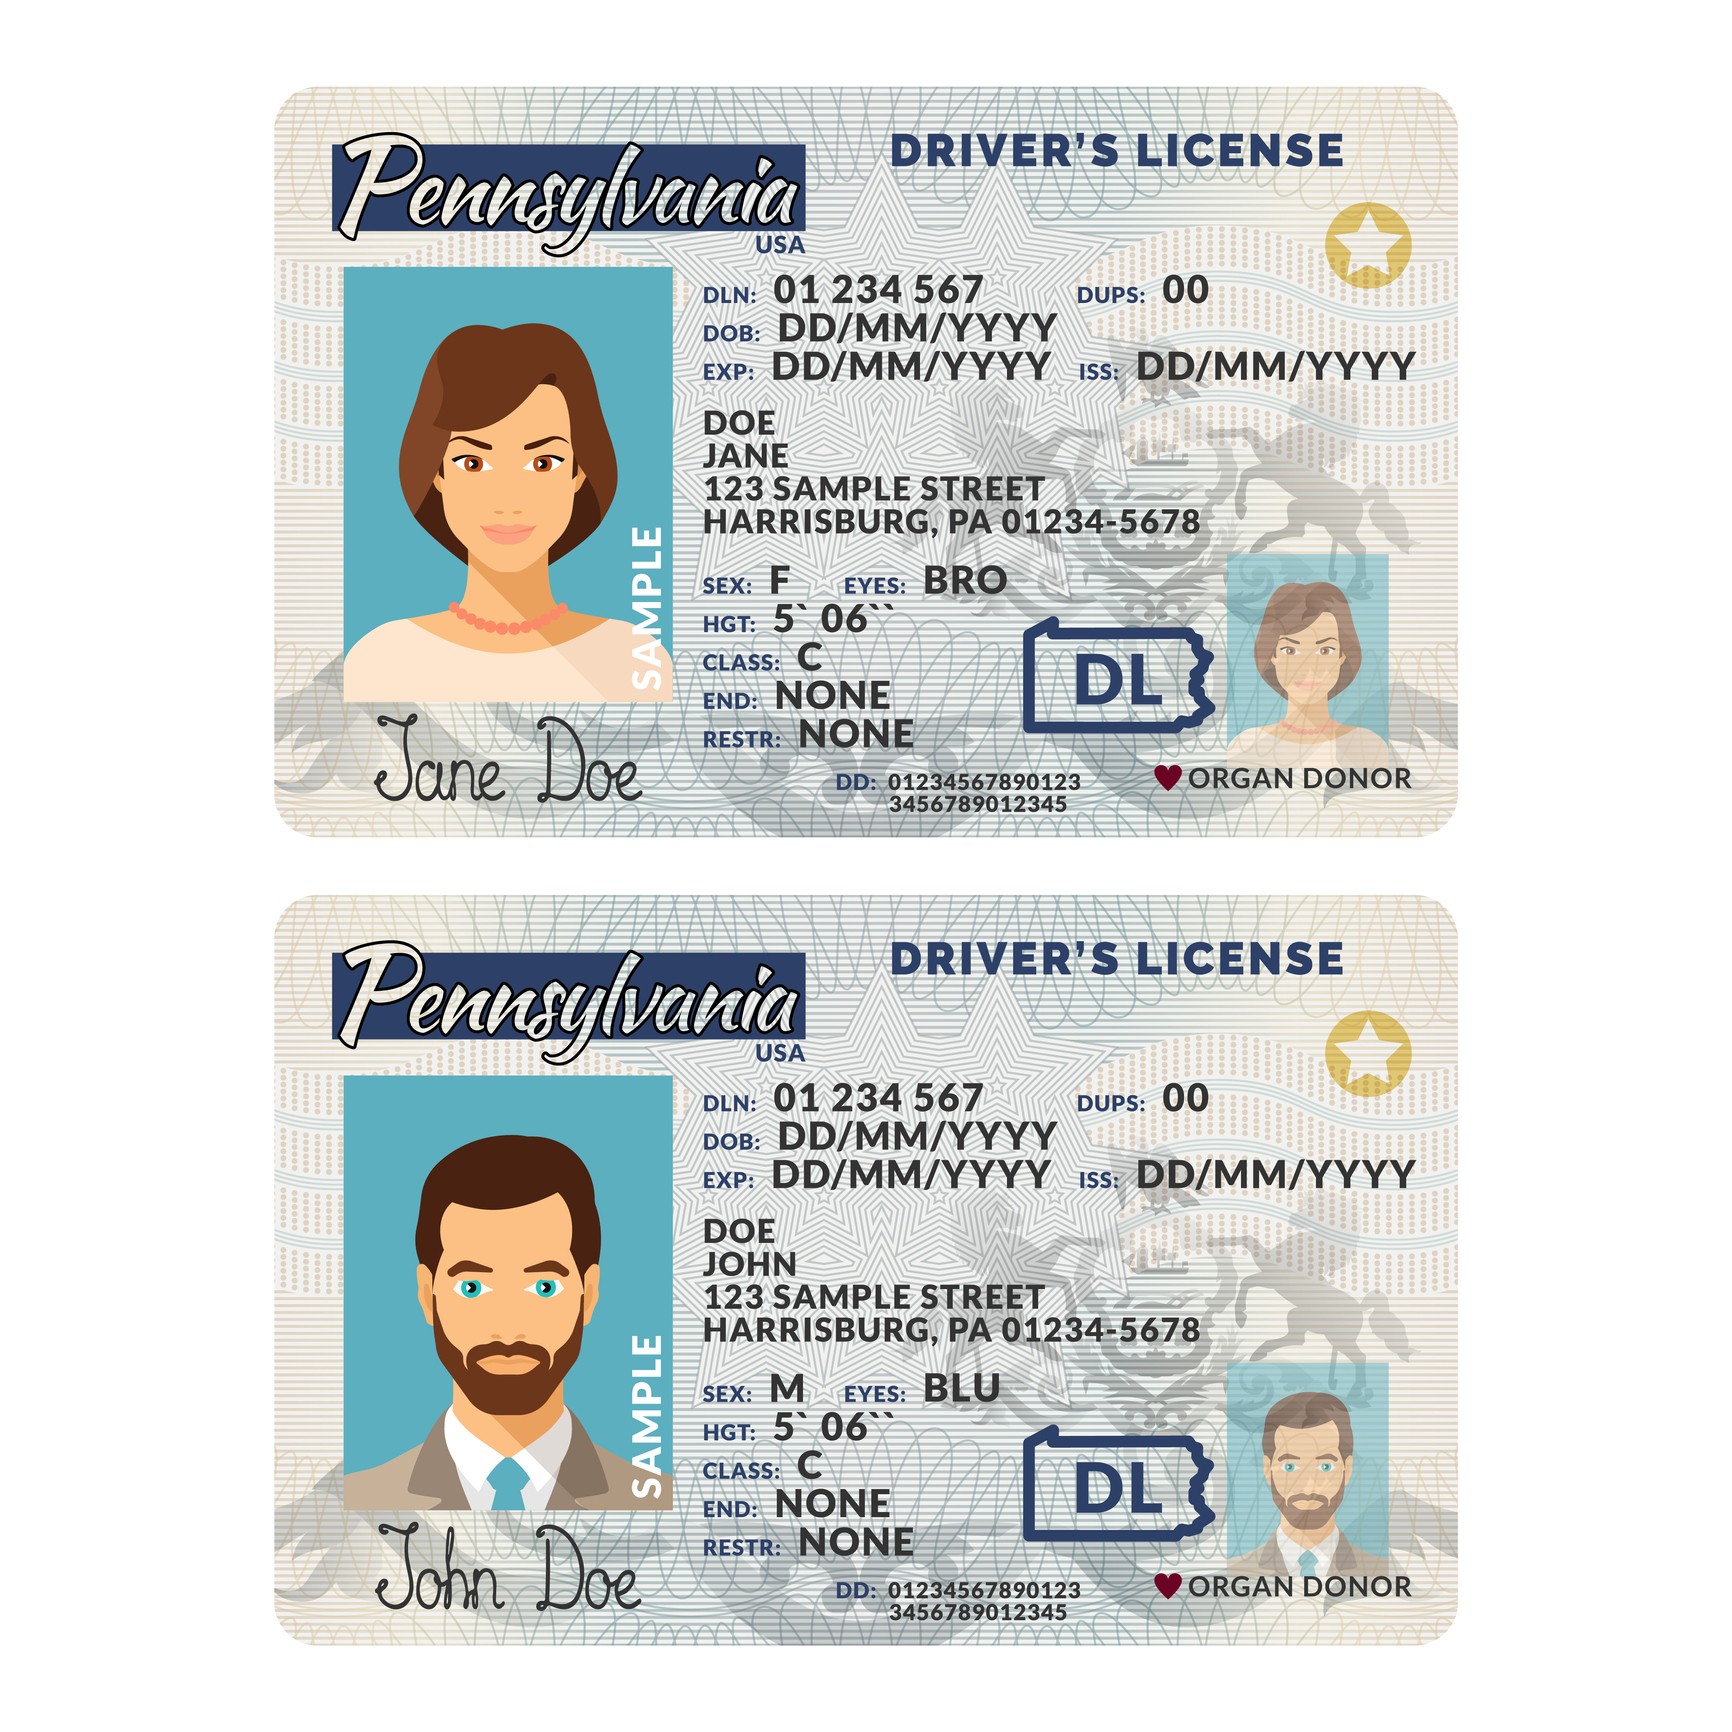 The deadline for getting a Real ID is coming, but what the heck is it